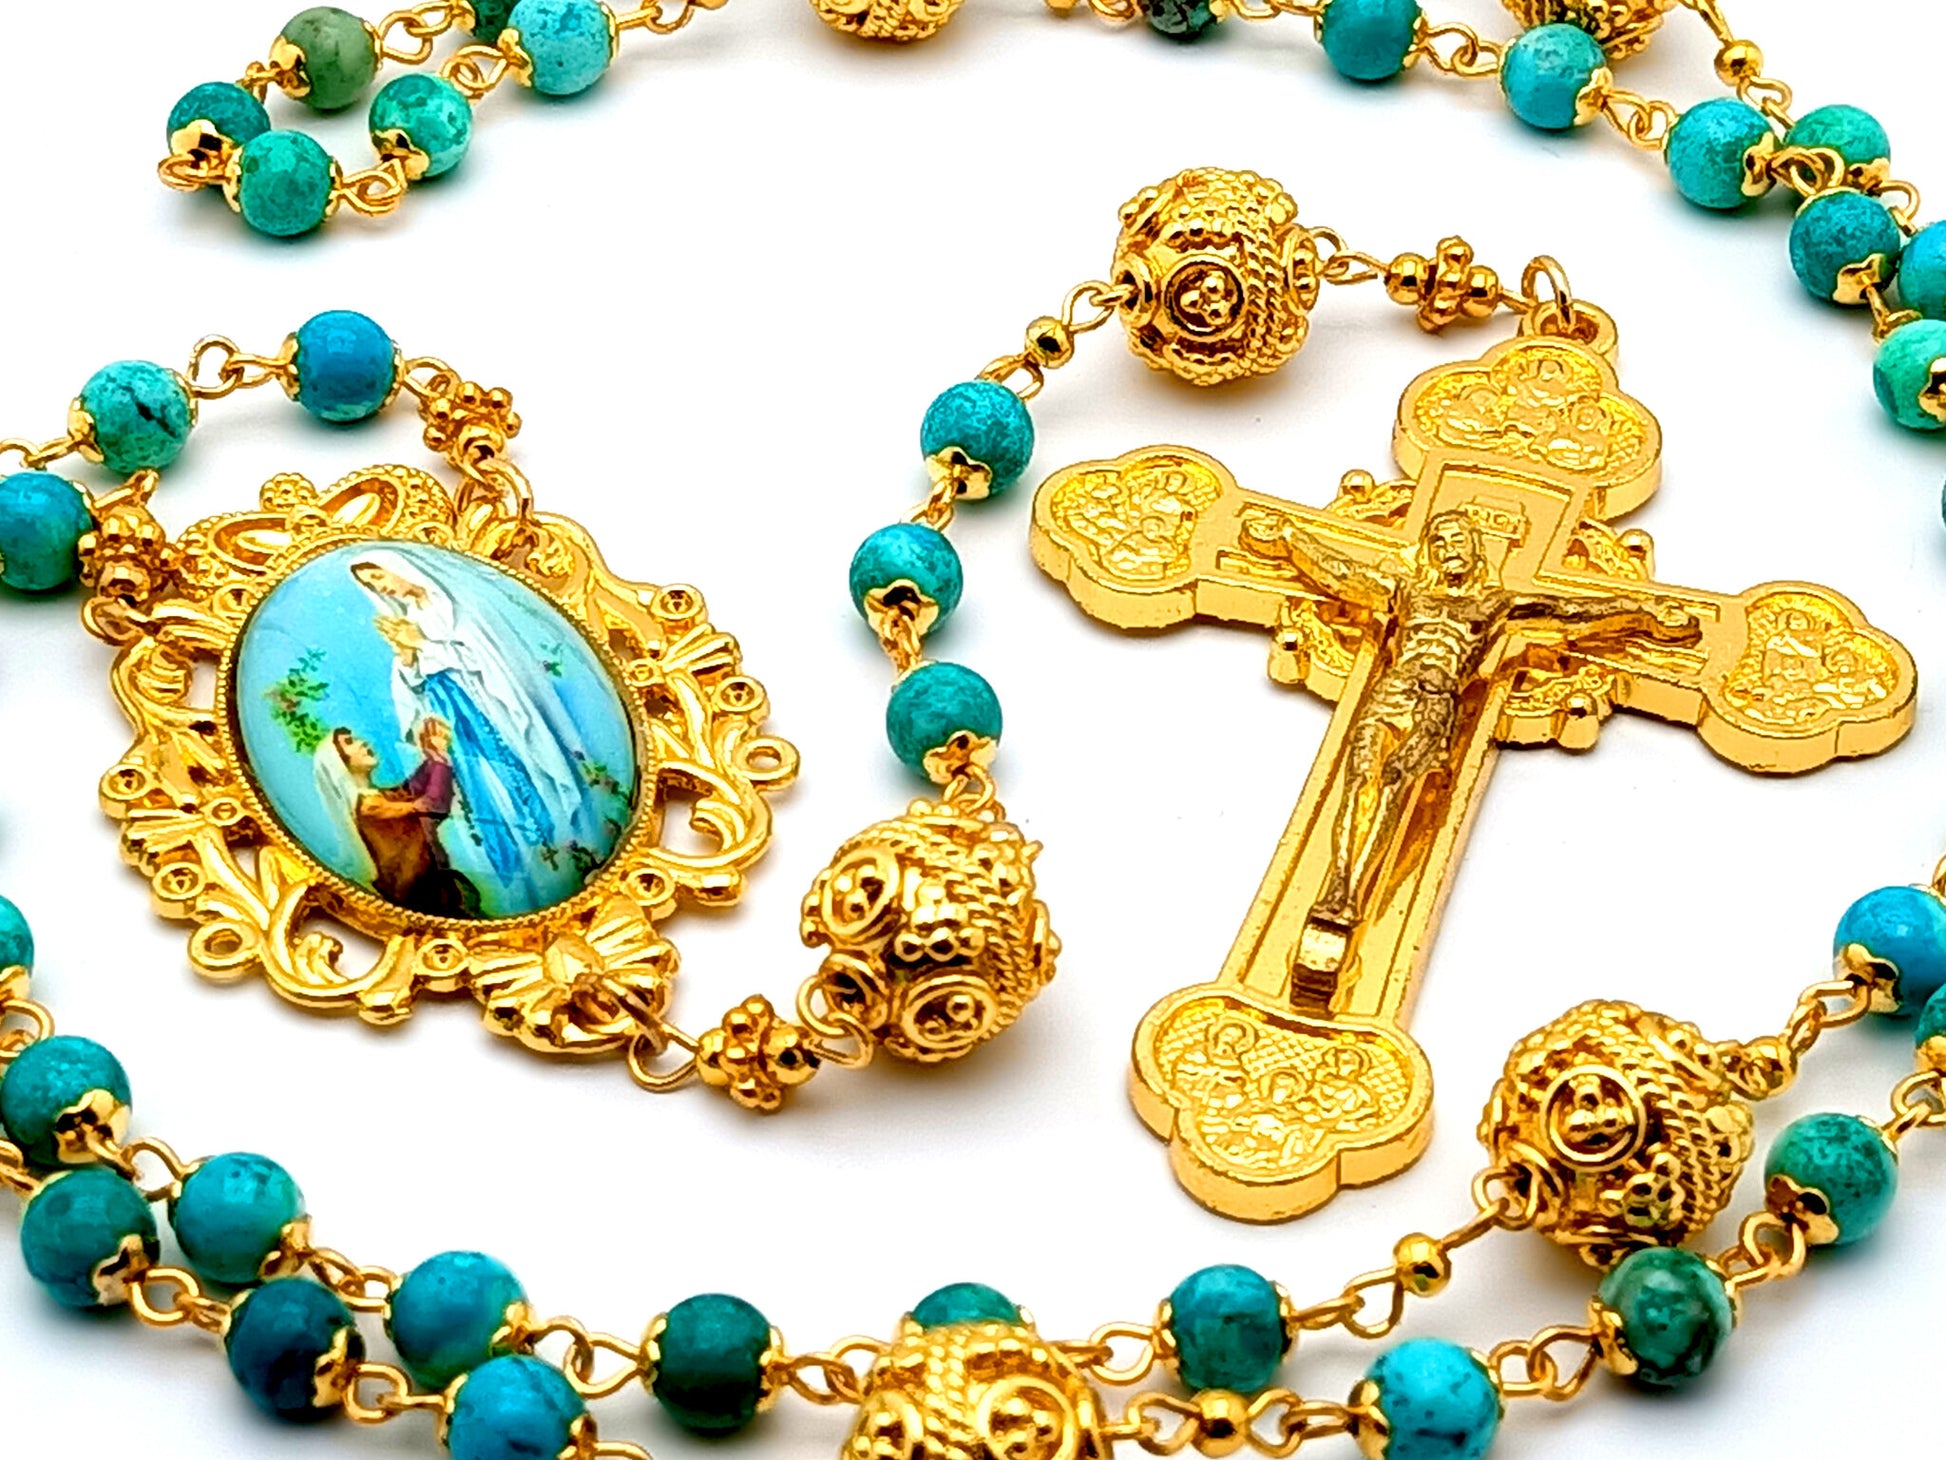 Our Lady of Lourdes and Saint Bernadette unique rosary beads with gold and turquoise gemstone beads and gold plated Twelve Apostles crucifix.